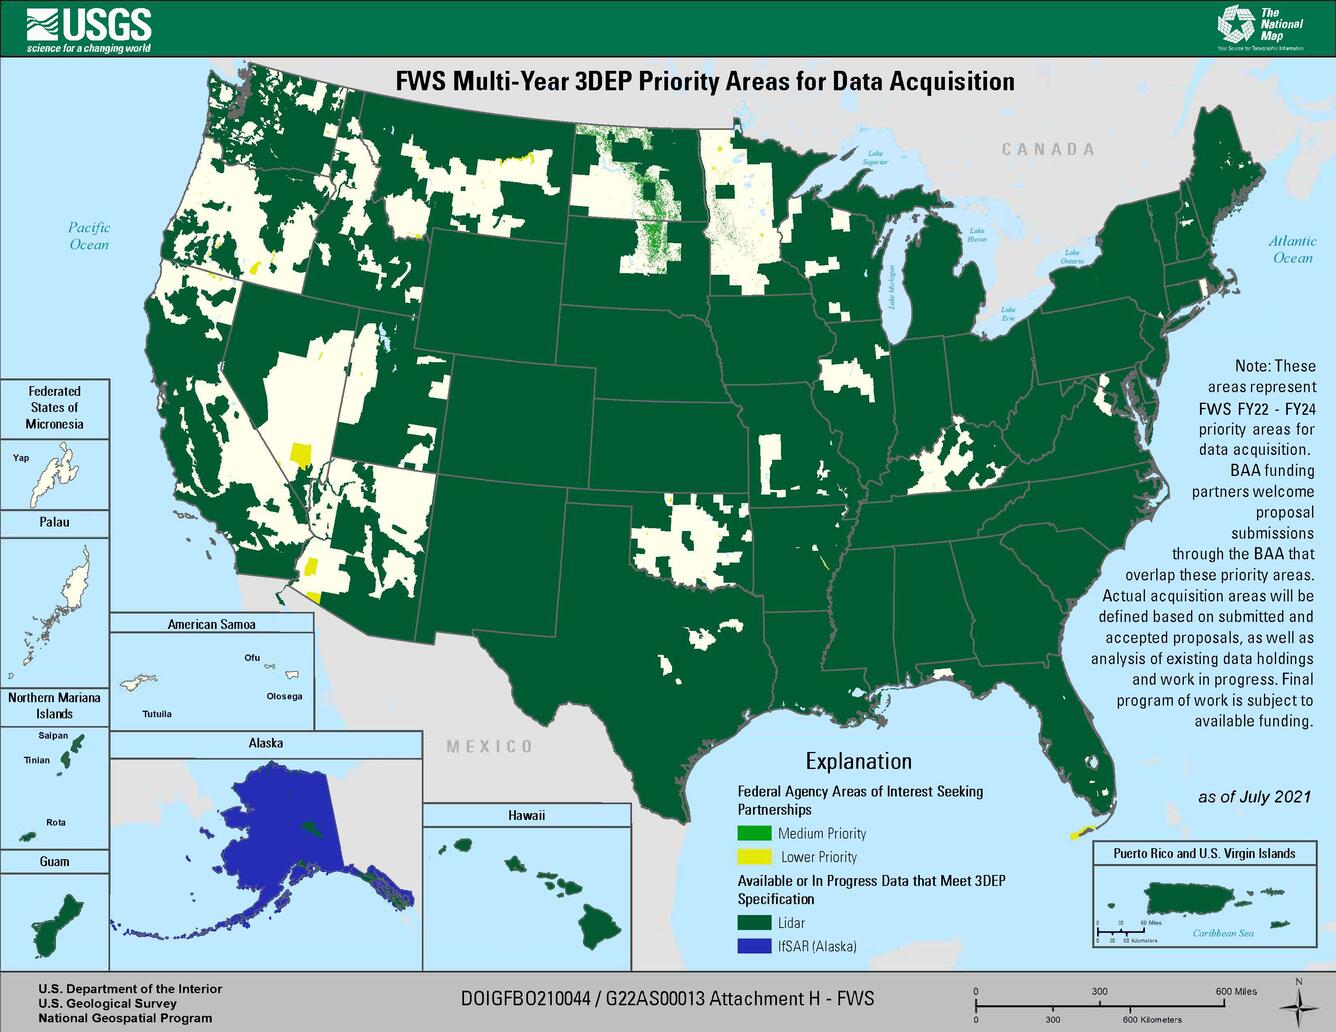 Attachment H: FY22-24 FWS Multi-Year 3DEP Priority Areas for Data...